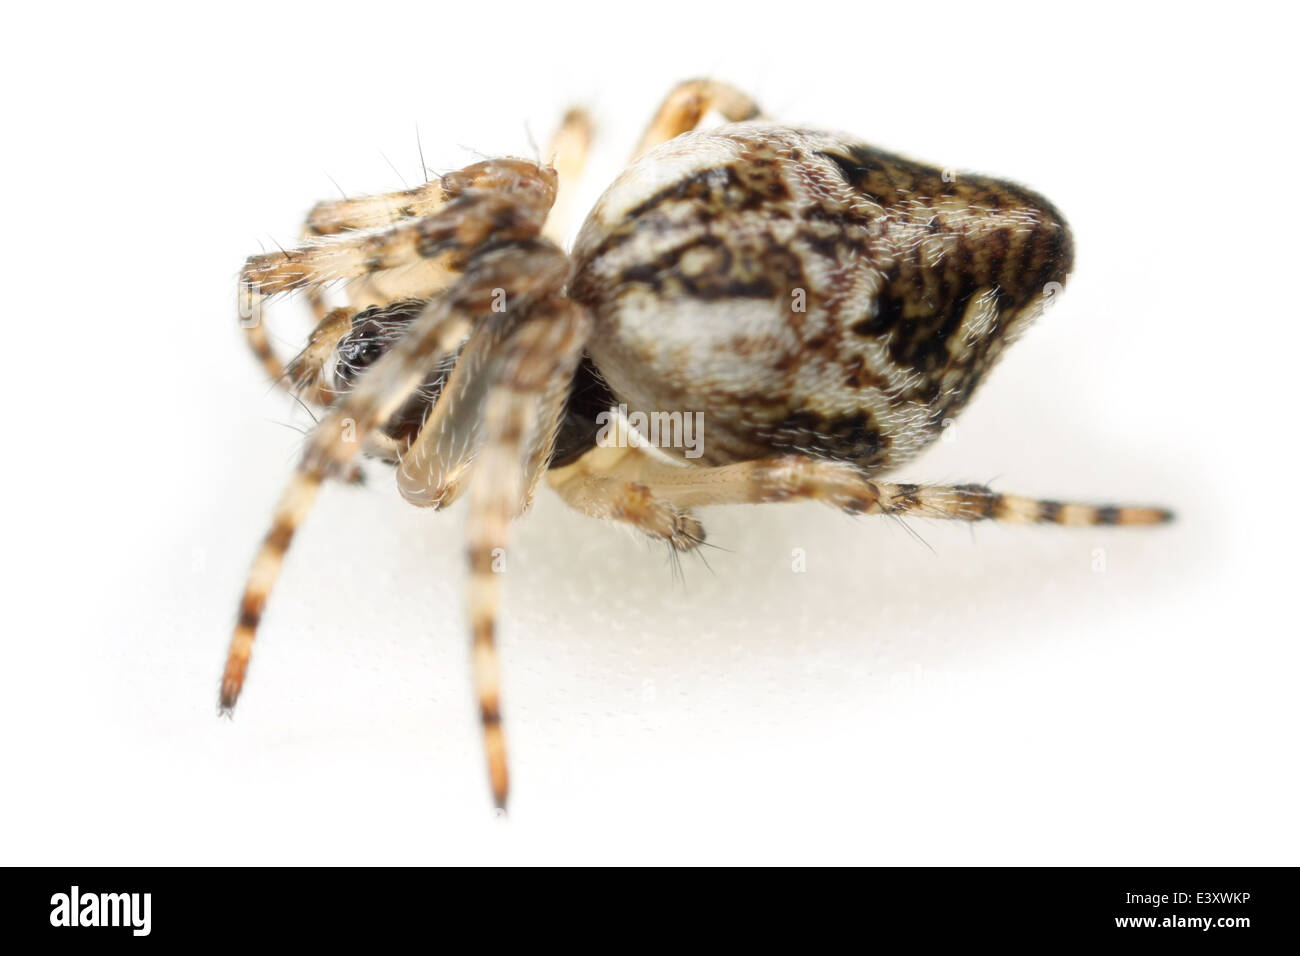 Trash line spider (Cyclosa conica), part of the family Araneidae - Orbweavers. Isolated on white background. Stock Photo